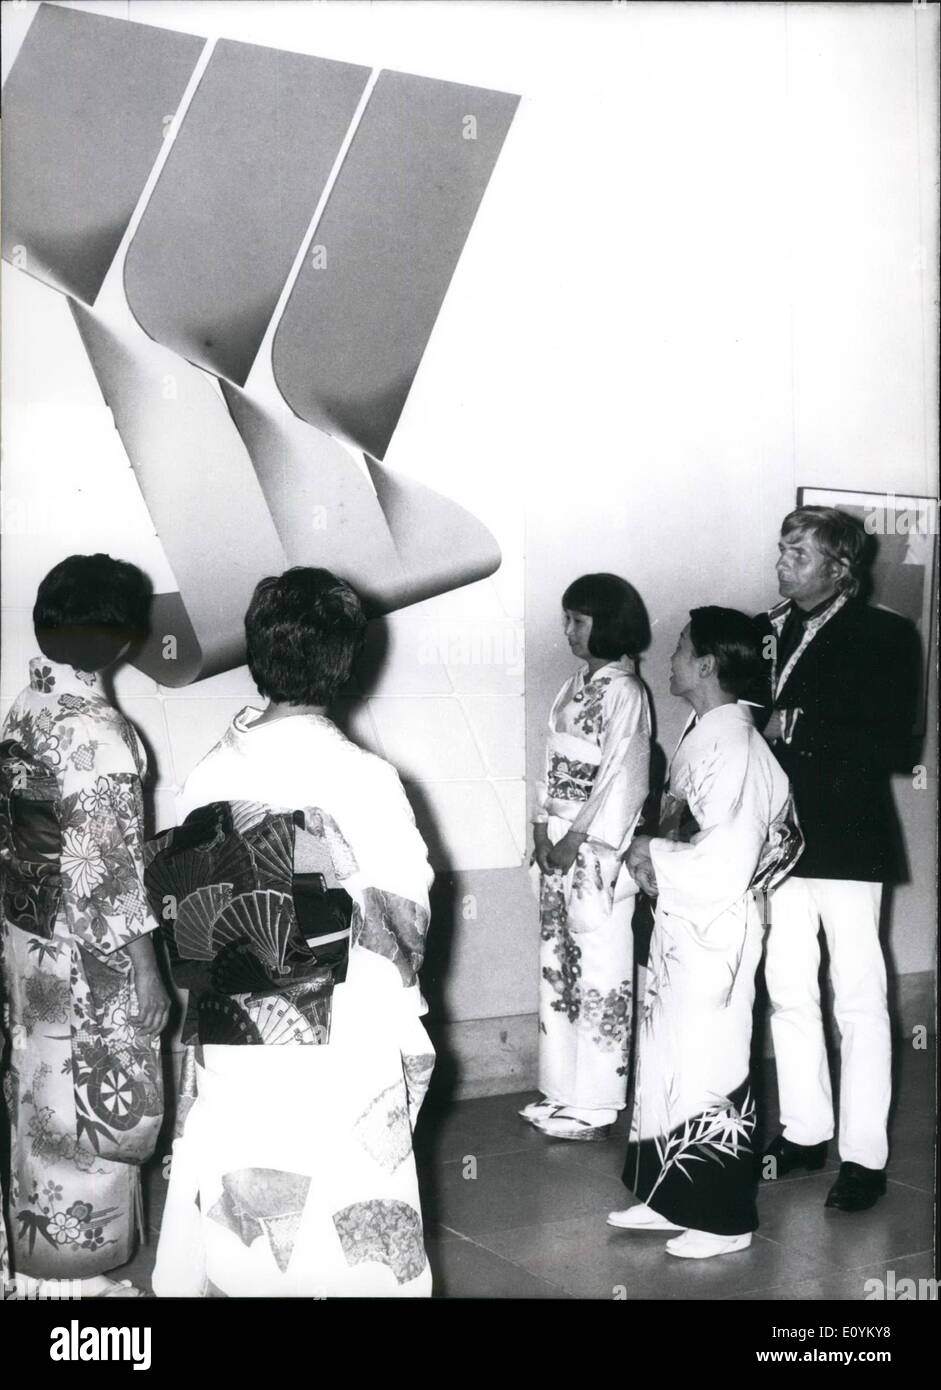 Sep. 09, 1970 - Seem to be the people on this picture; we see Gunter Sachs (at the right) in company of the beauties from the country of the rising sun. They are facing a work of modern art, called ''3 different strips A.A.'' which has been created by Akira Asai (a Japanese artist born in 1928). It will be shown for the first time in Europe - together with other creations of modern art - on the occasion of the ''Japan Art Festival 1970 Munich Stock Photo